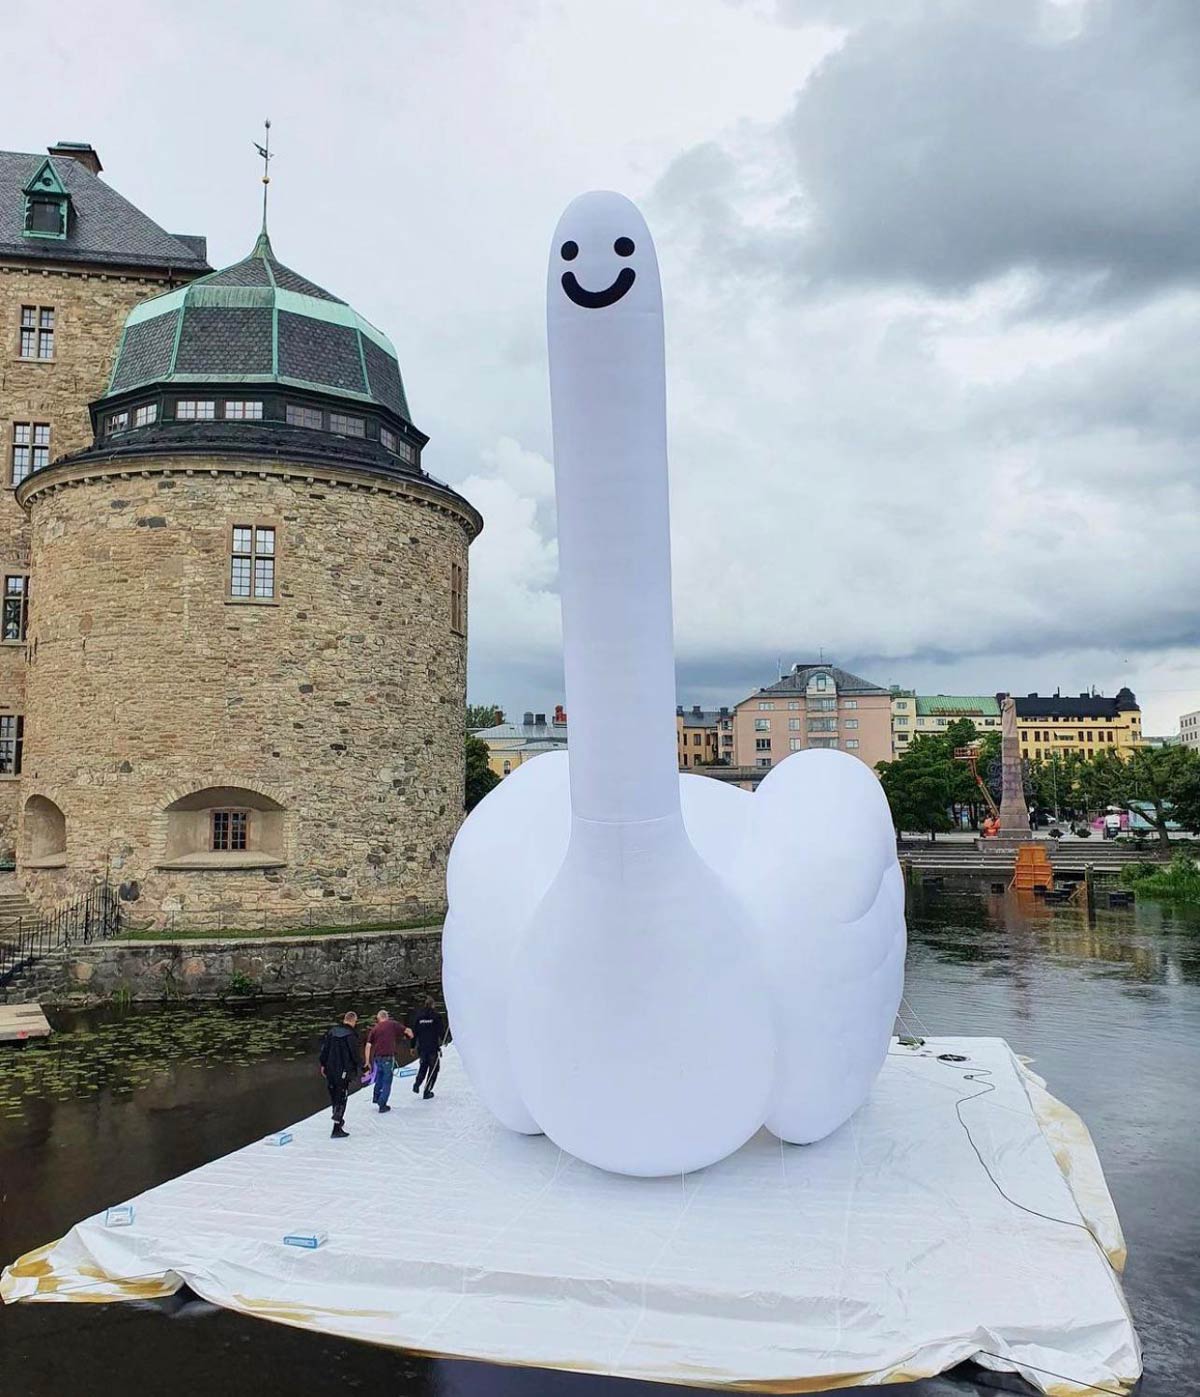 There is currently an art exhibition in my home town Örebro, Sweden. This is one of the installations. Castle for reference